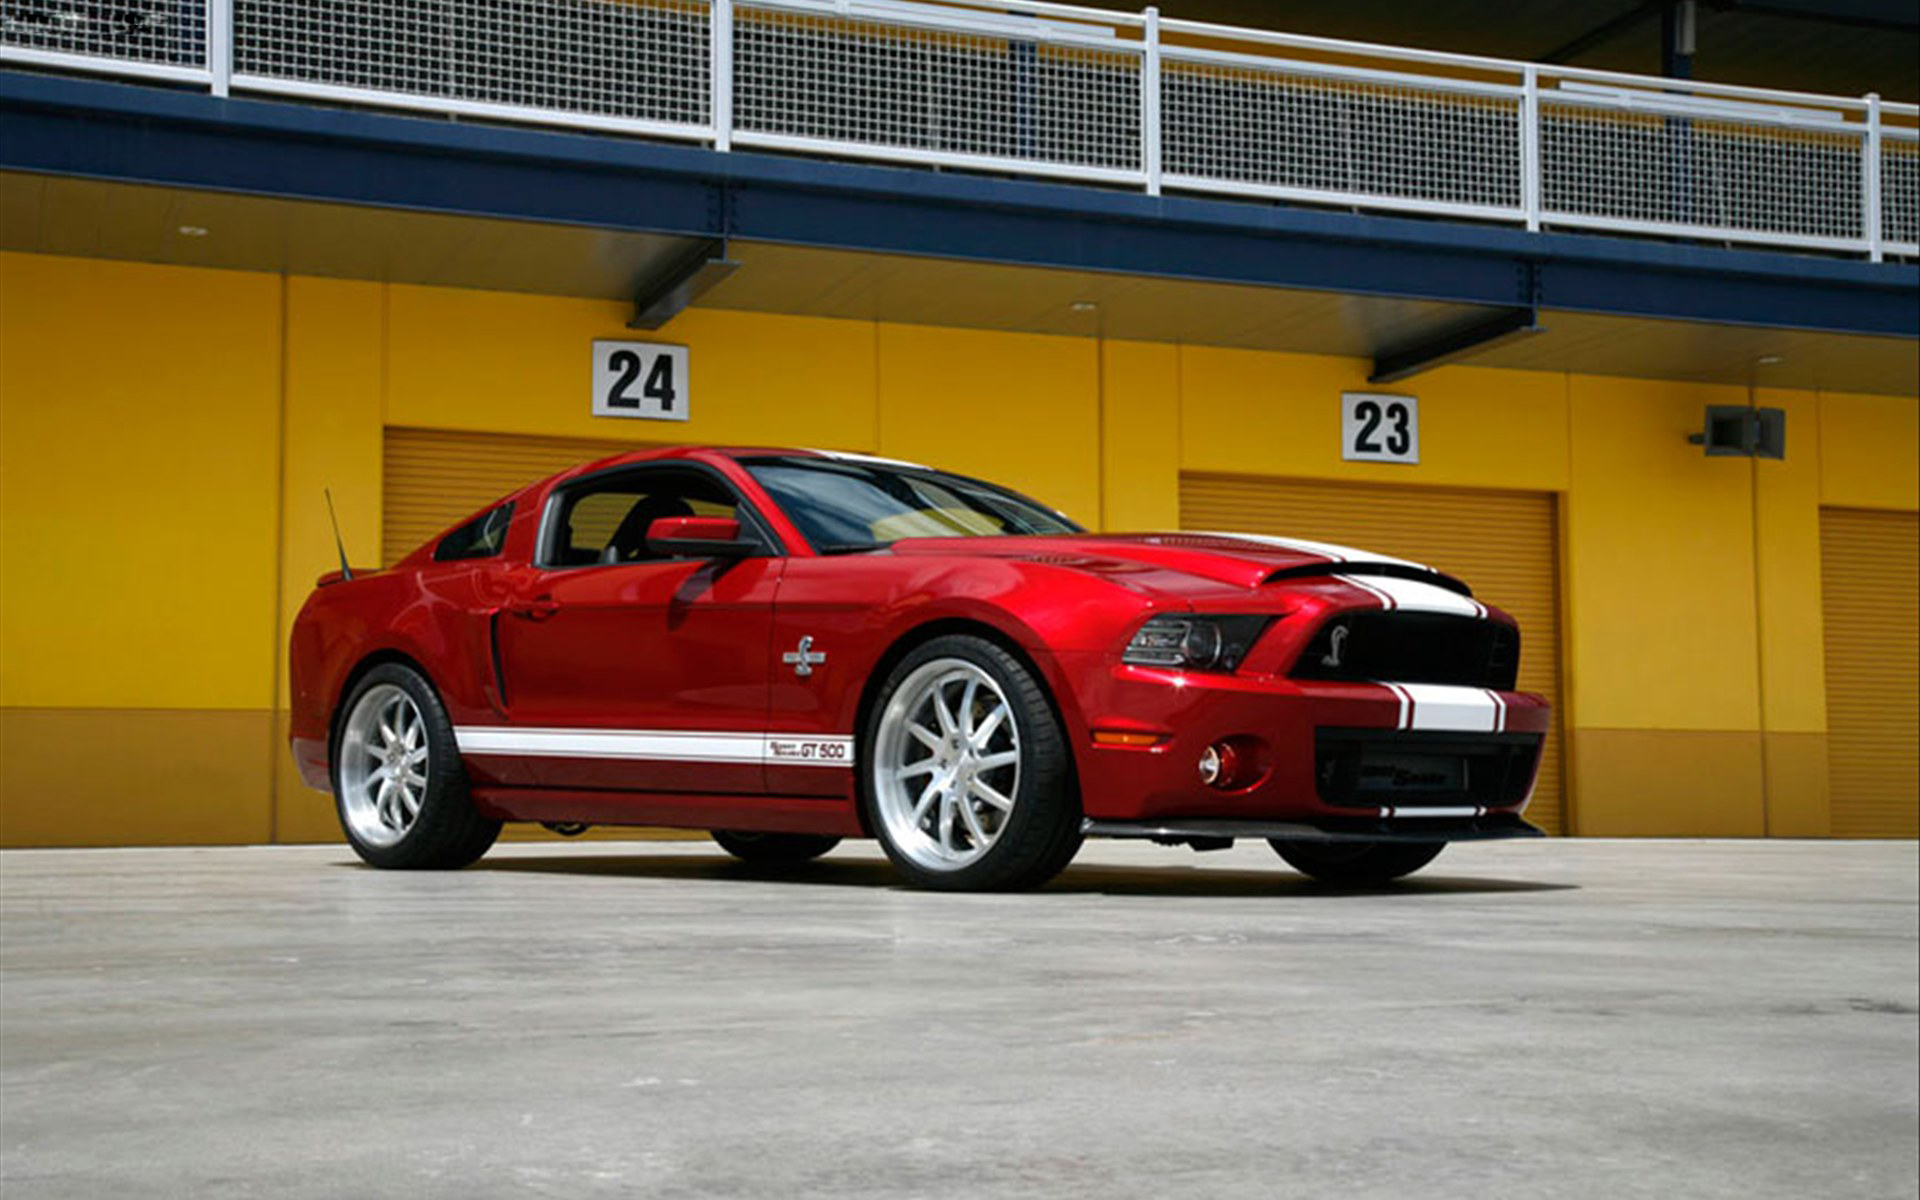 HD for desktop 1080p Ford Mustang Shelby Gt500 